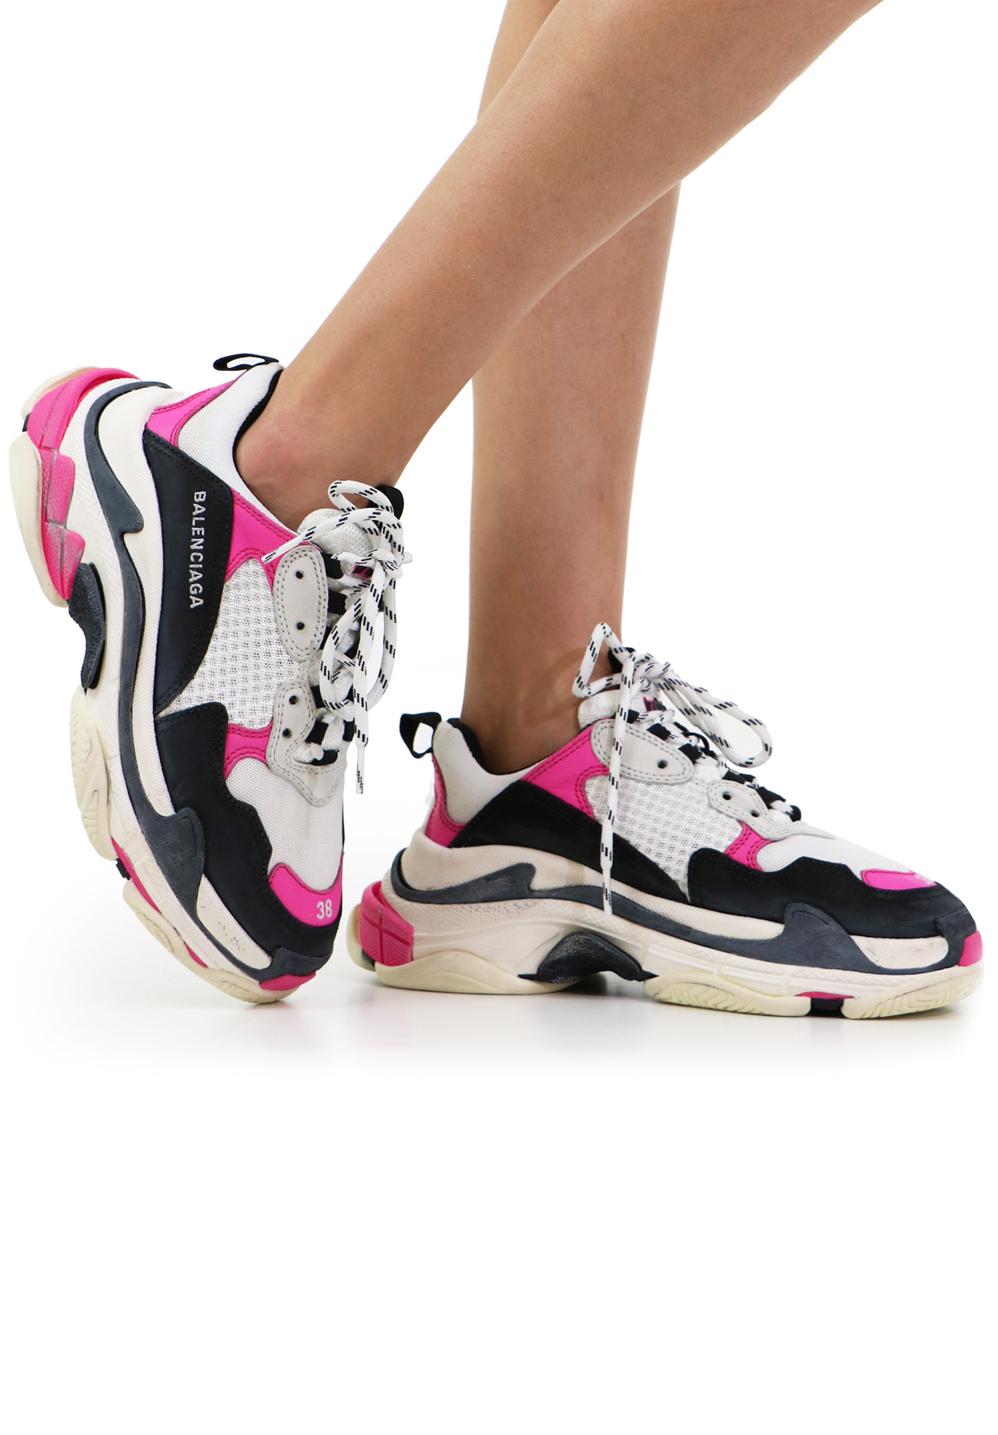 For sale Balenciaga Triple S Trainers PiNK Black sneakers